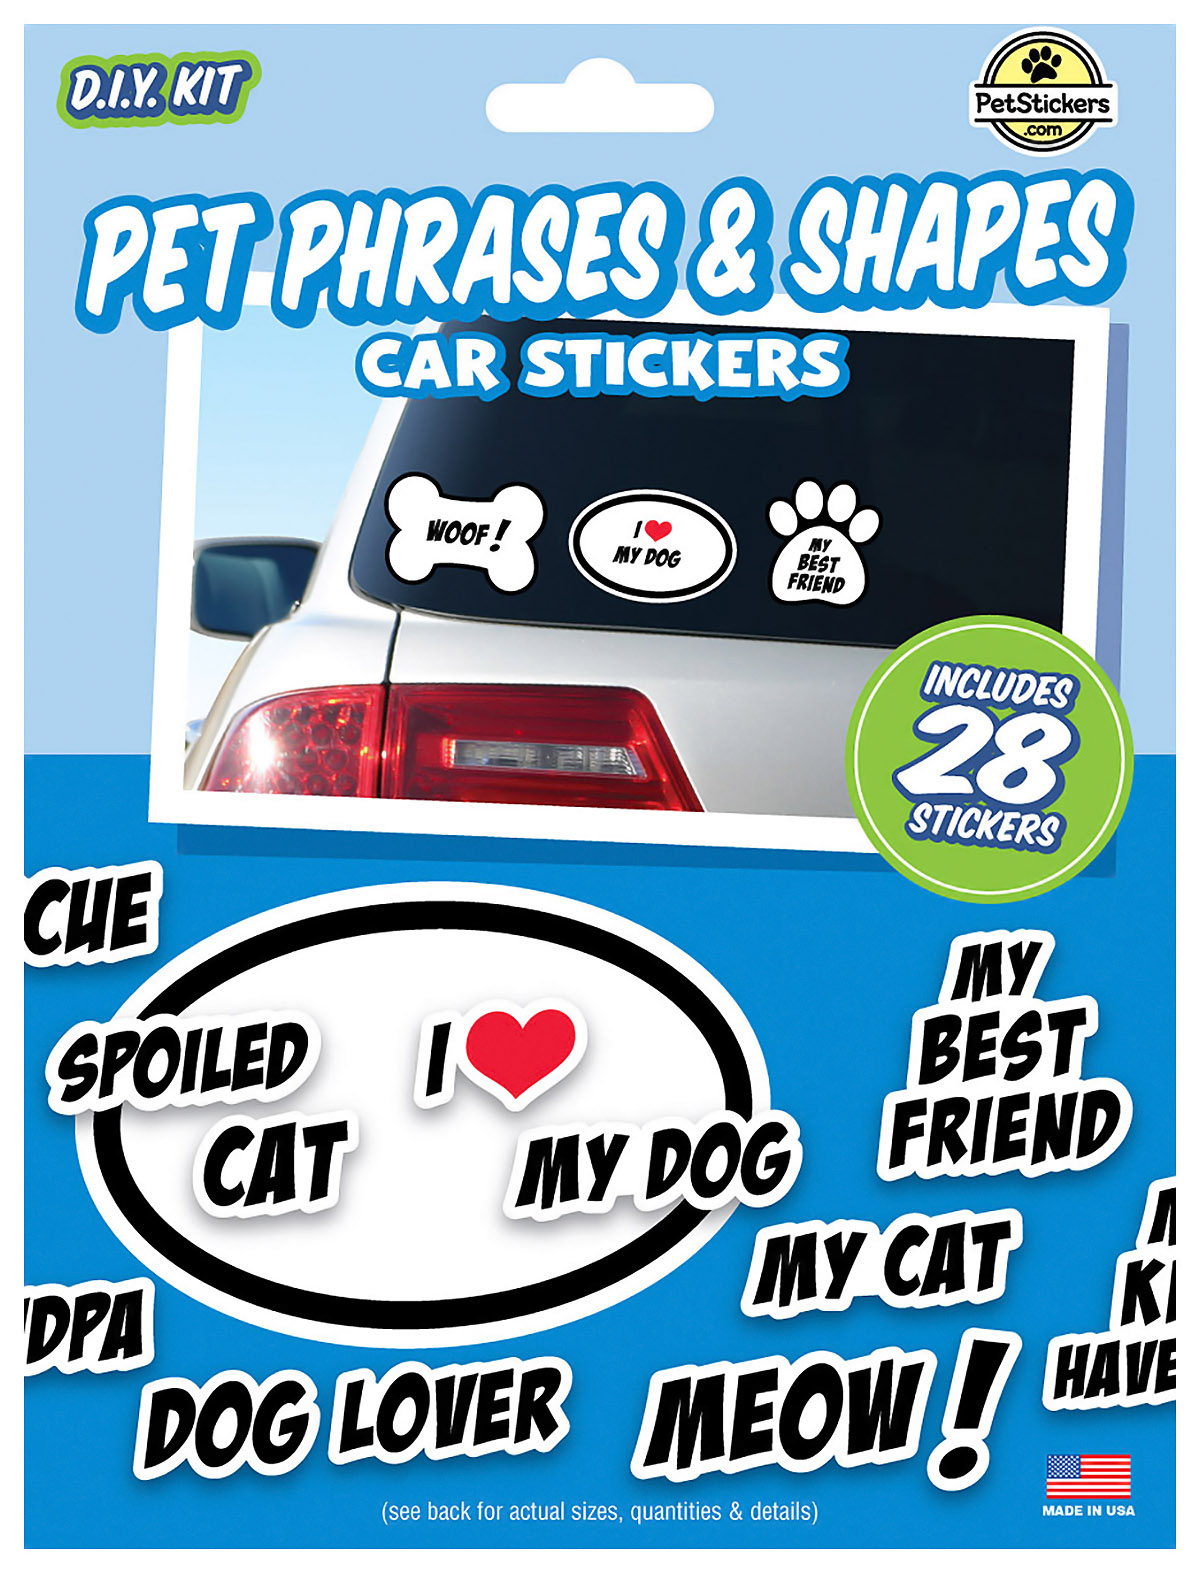 Car sticker with phrases